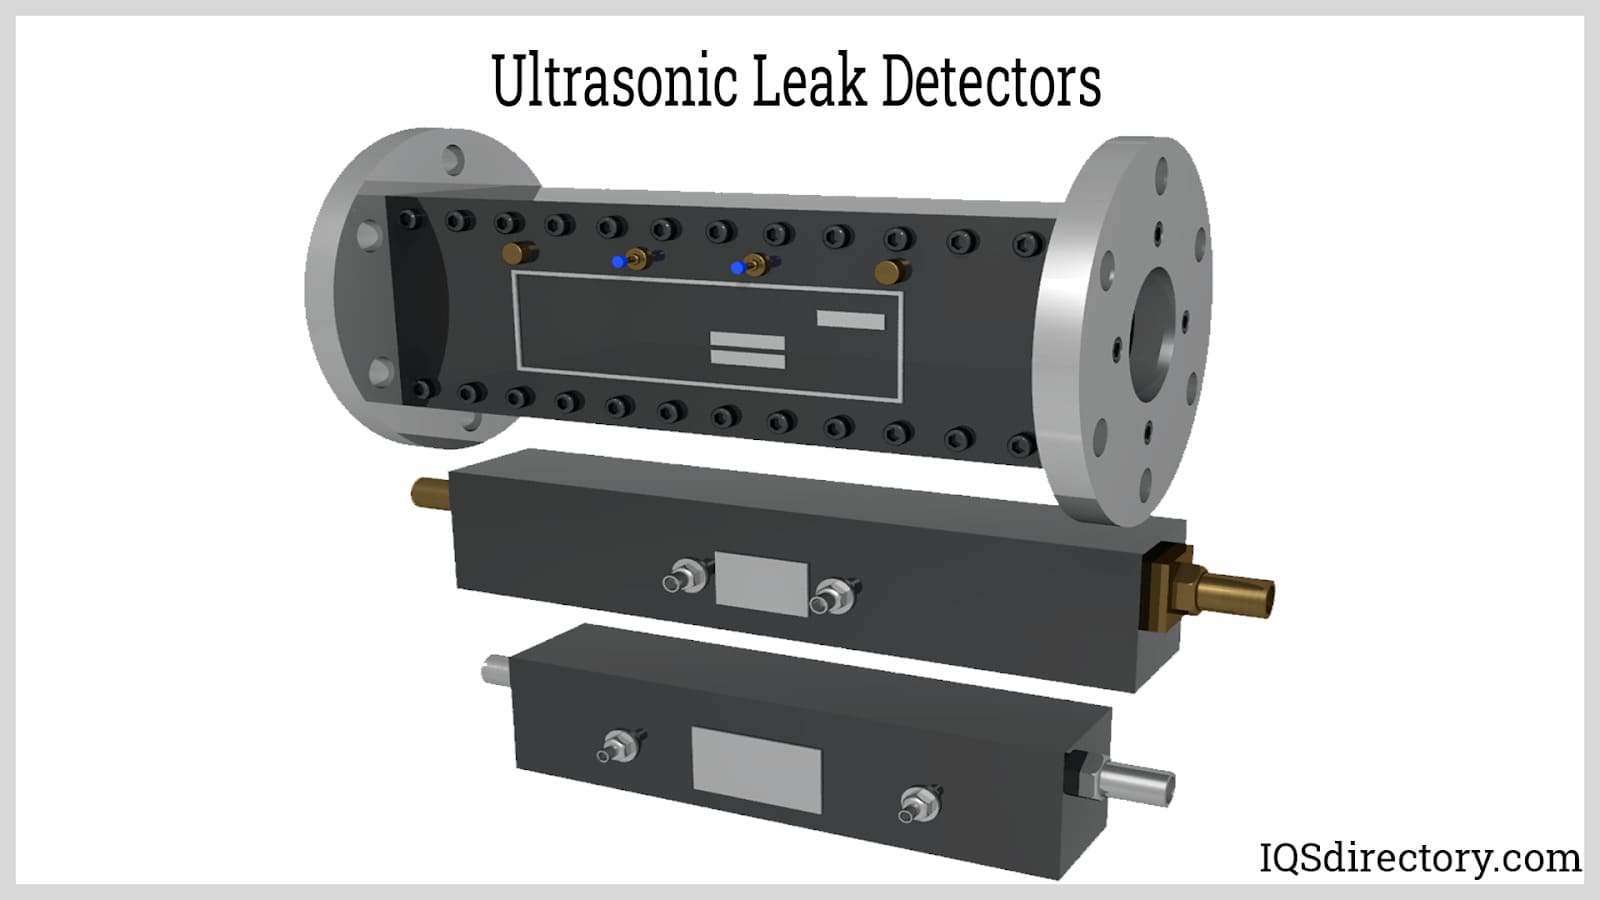 Leak Detector: What Is It? How Does It Work? Types Of, Uses